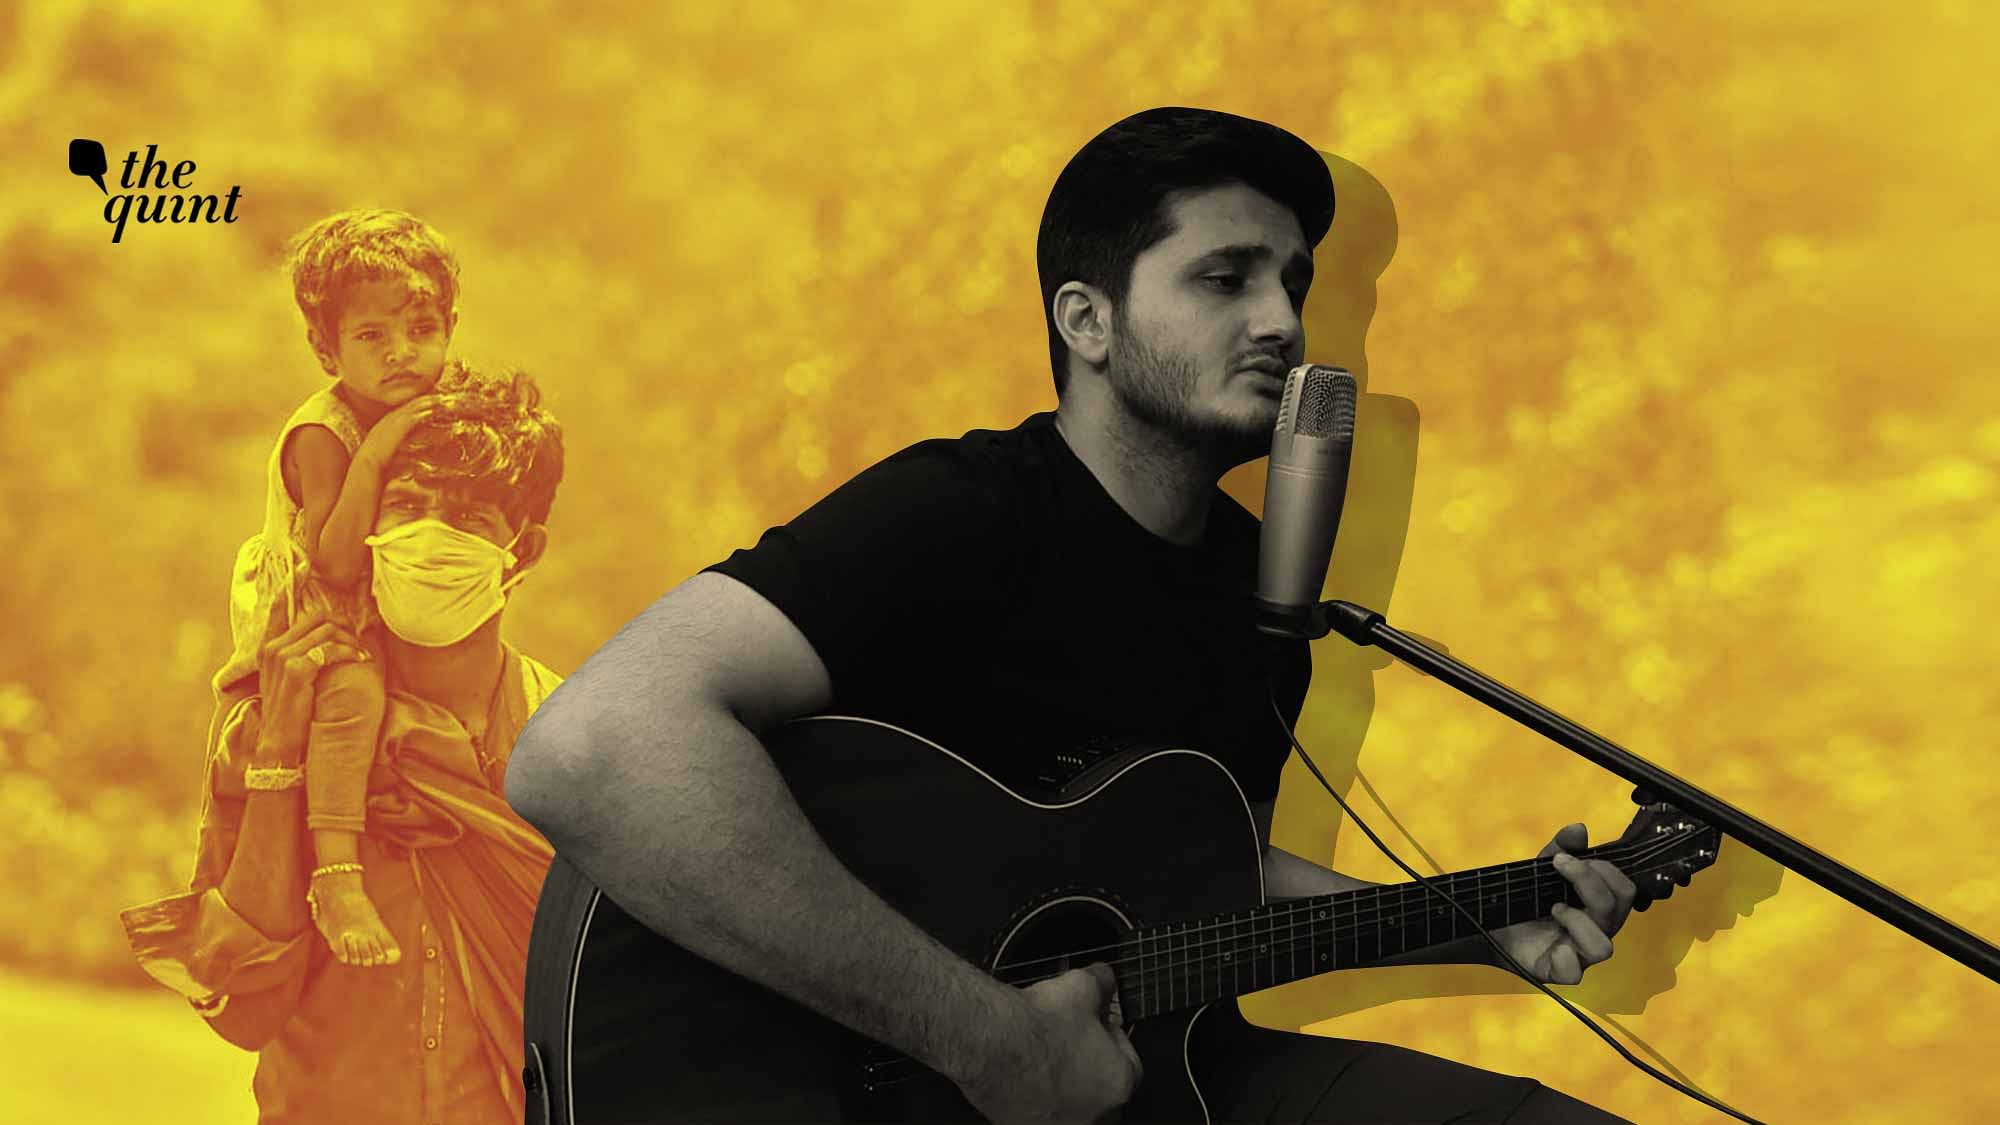 Poojan Sahil wrote a song for migrant labourers and others left hungry and away from home after the nationwide lockdown.